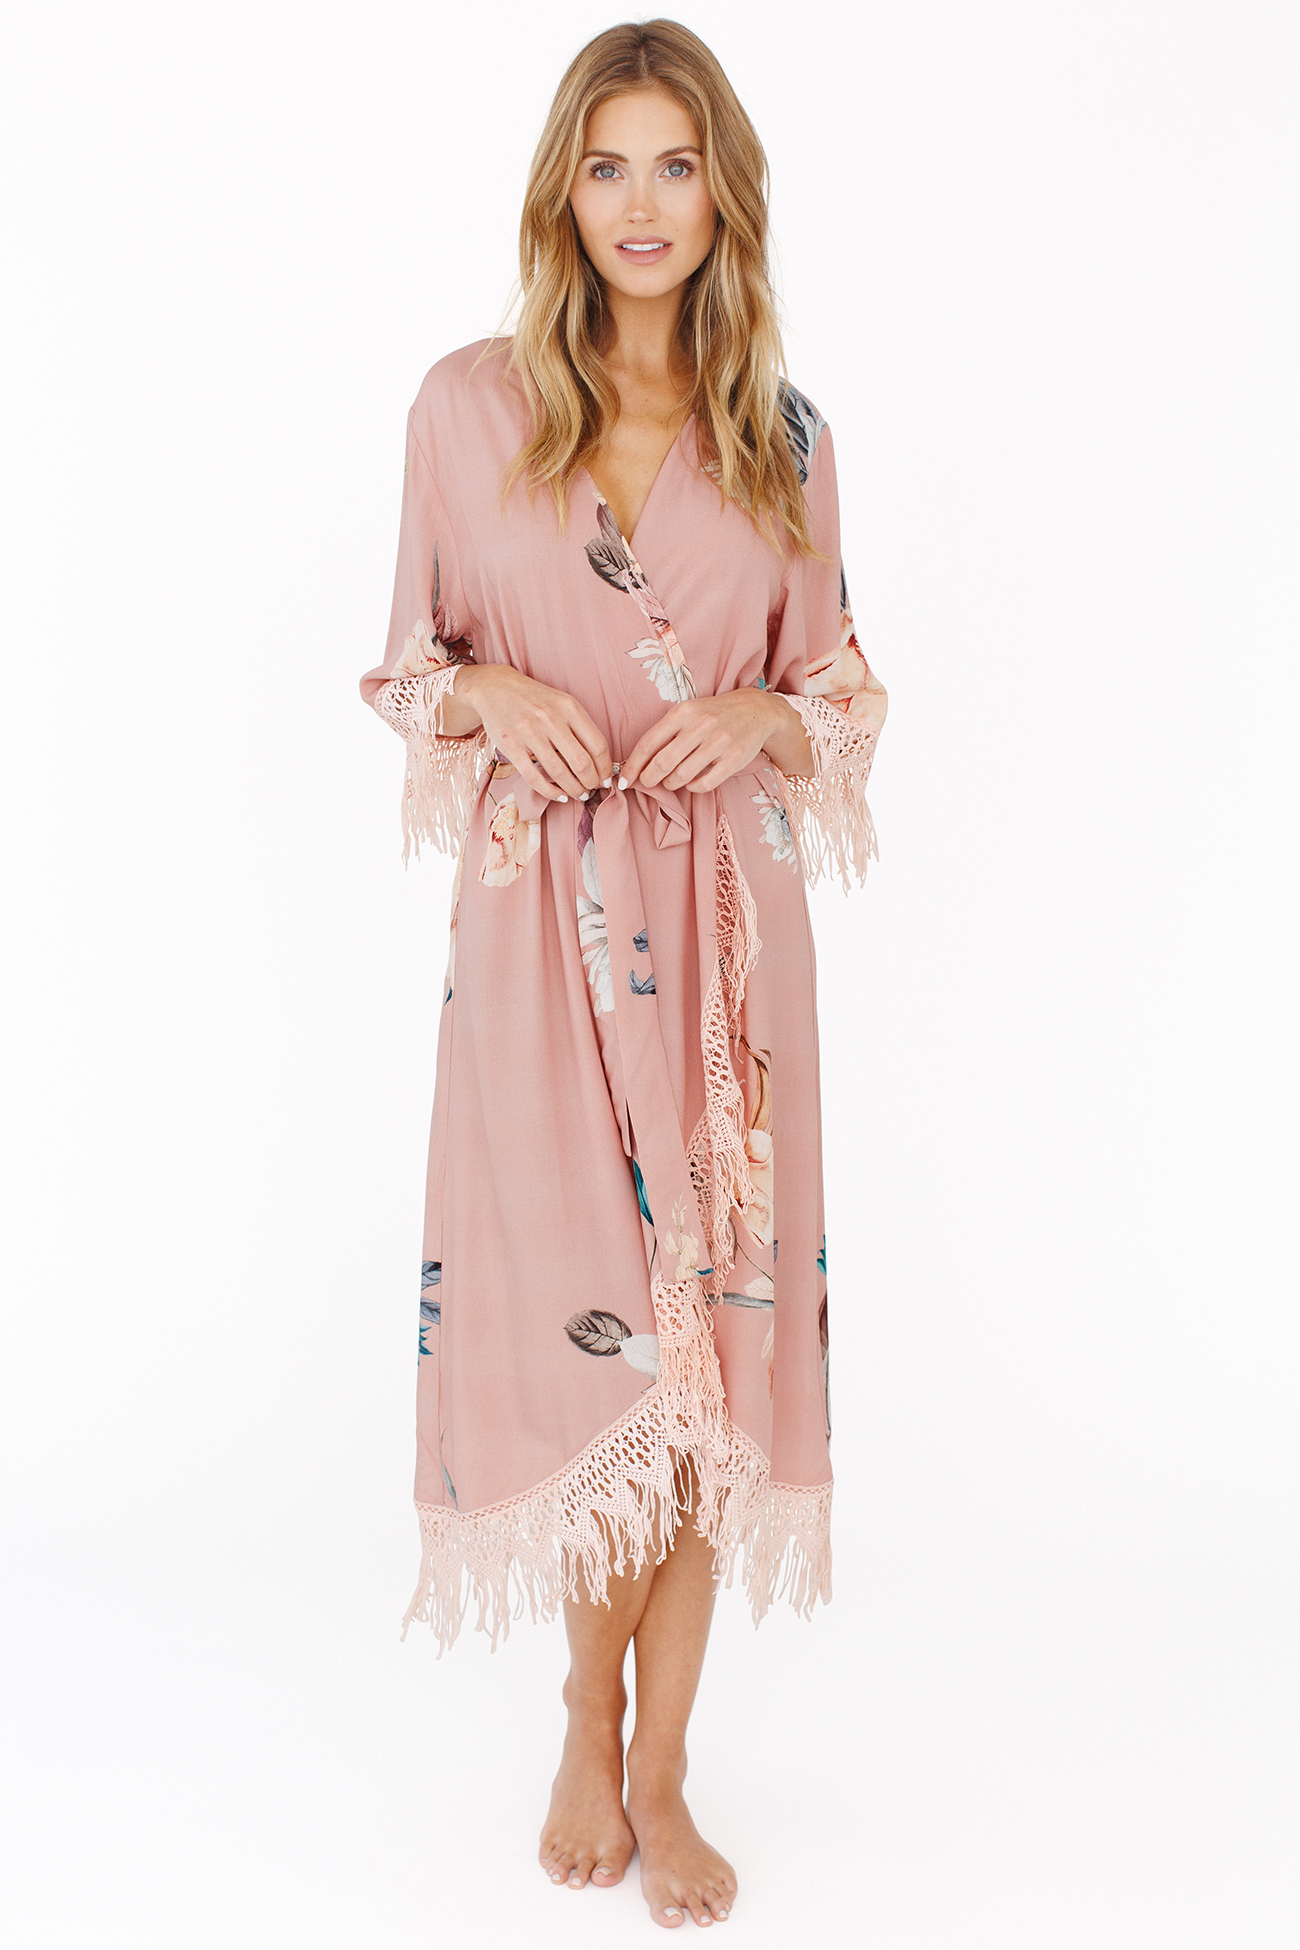 floral robe for bridesmaids and bride, fringed robe, pink robe